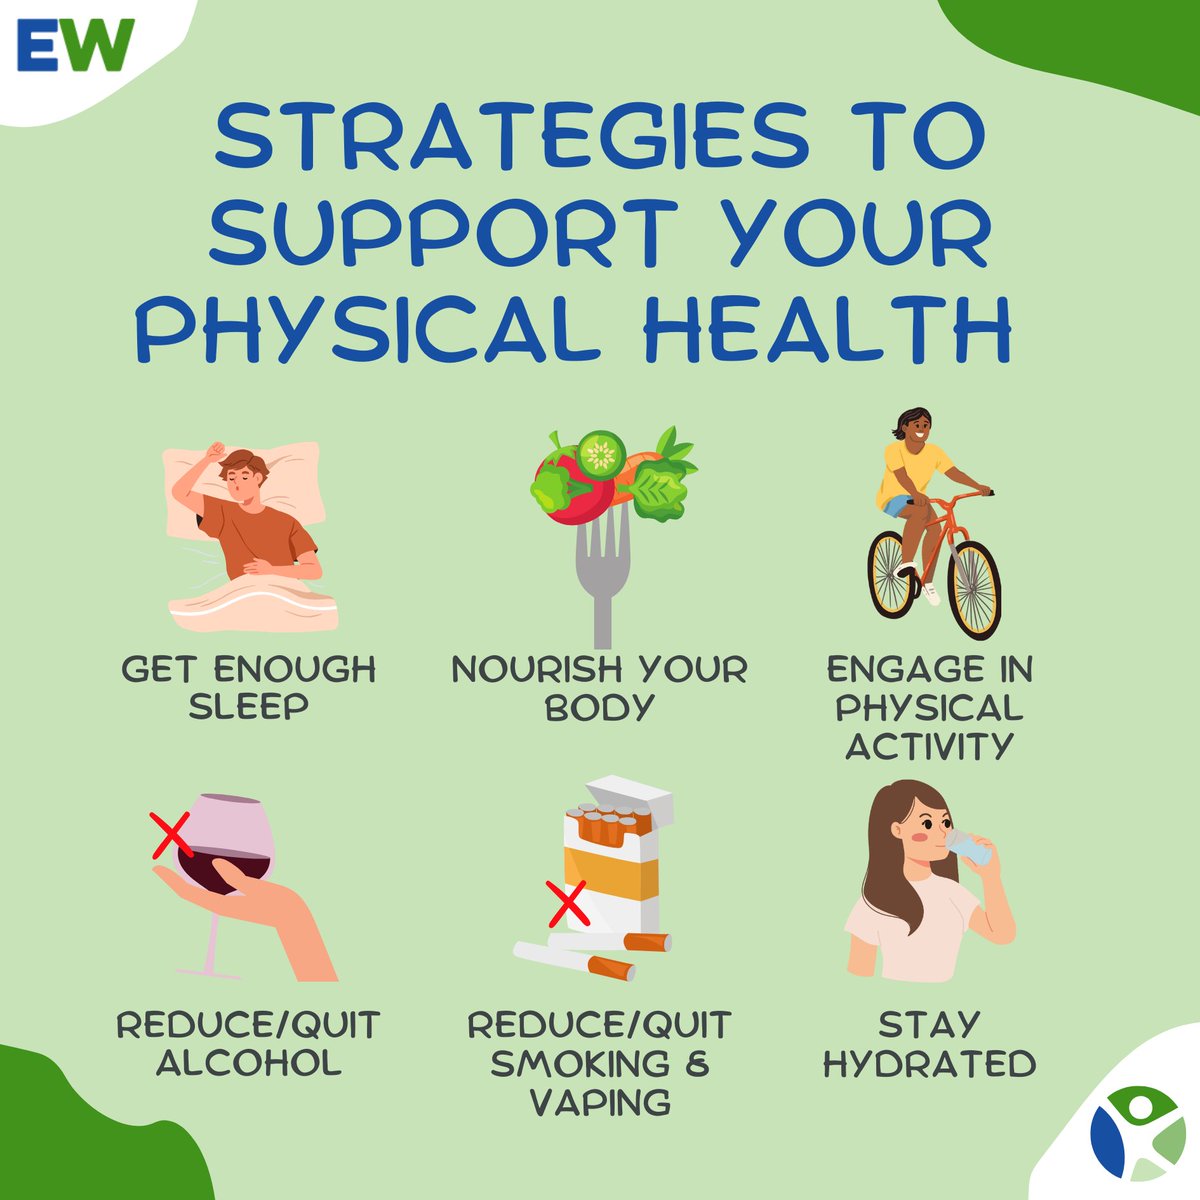 By supporting our physical health, our mental health benefits as a result 🏃 #MentalHealthMonth #MentalHealth #PhysicalHealth #ItsAllConnected #LookAfterYourMentalHealthAustralia